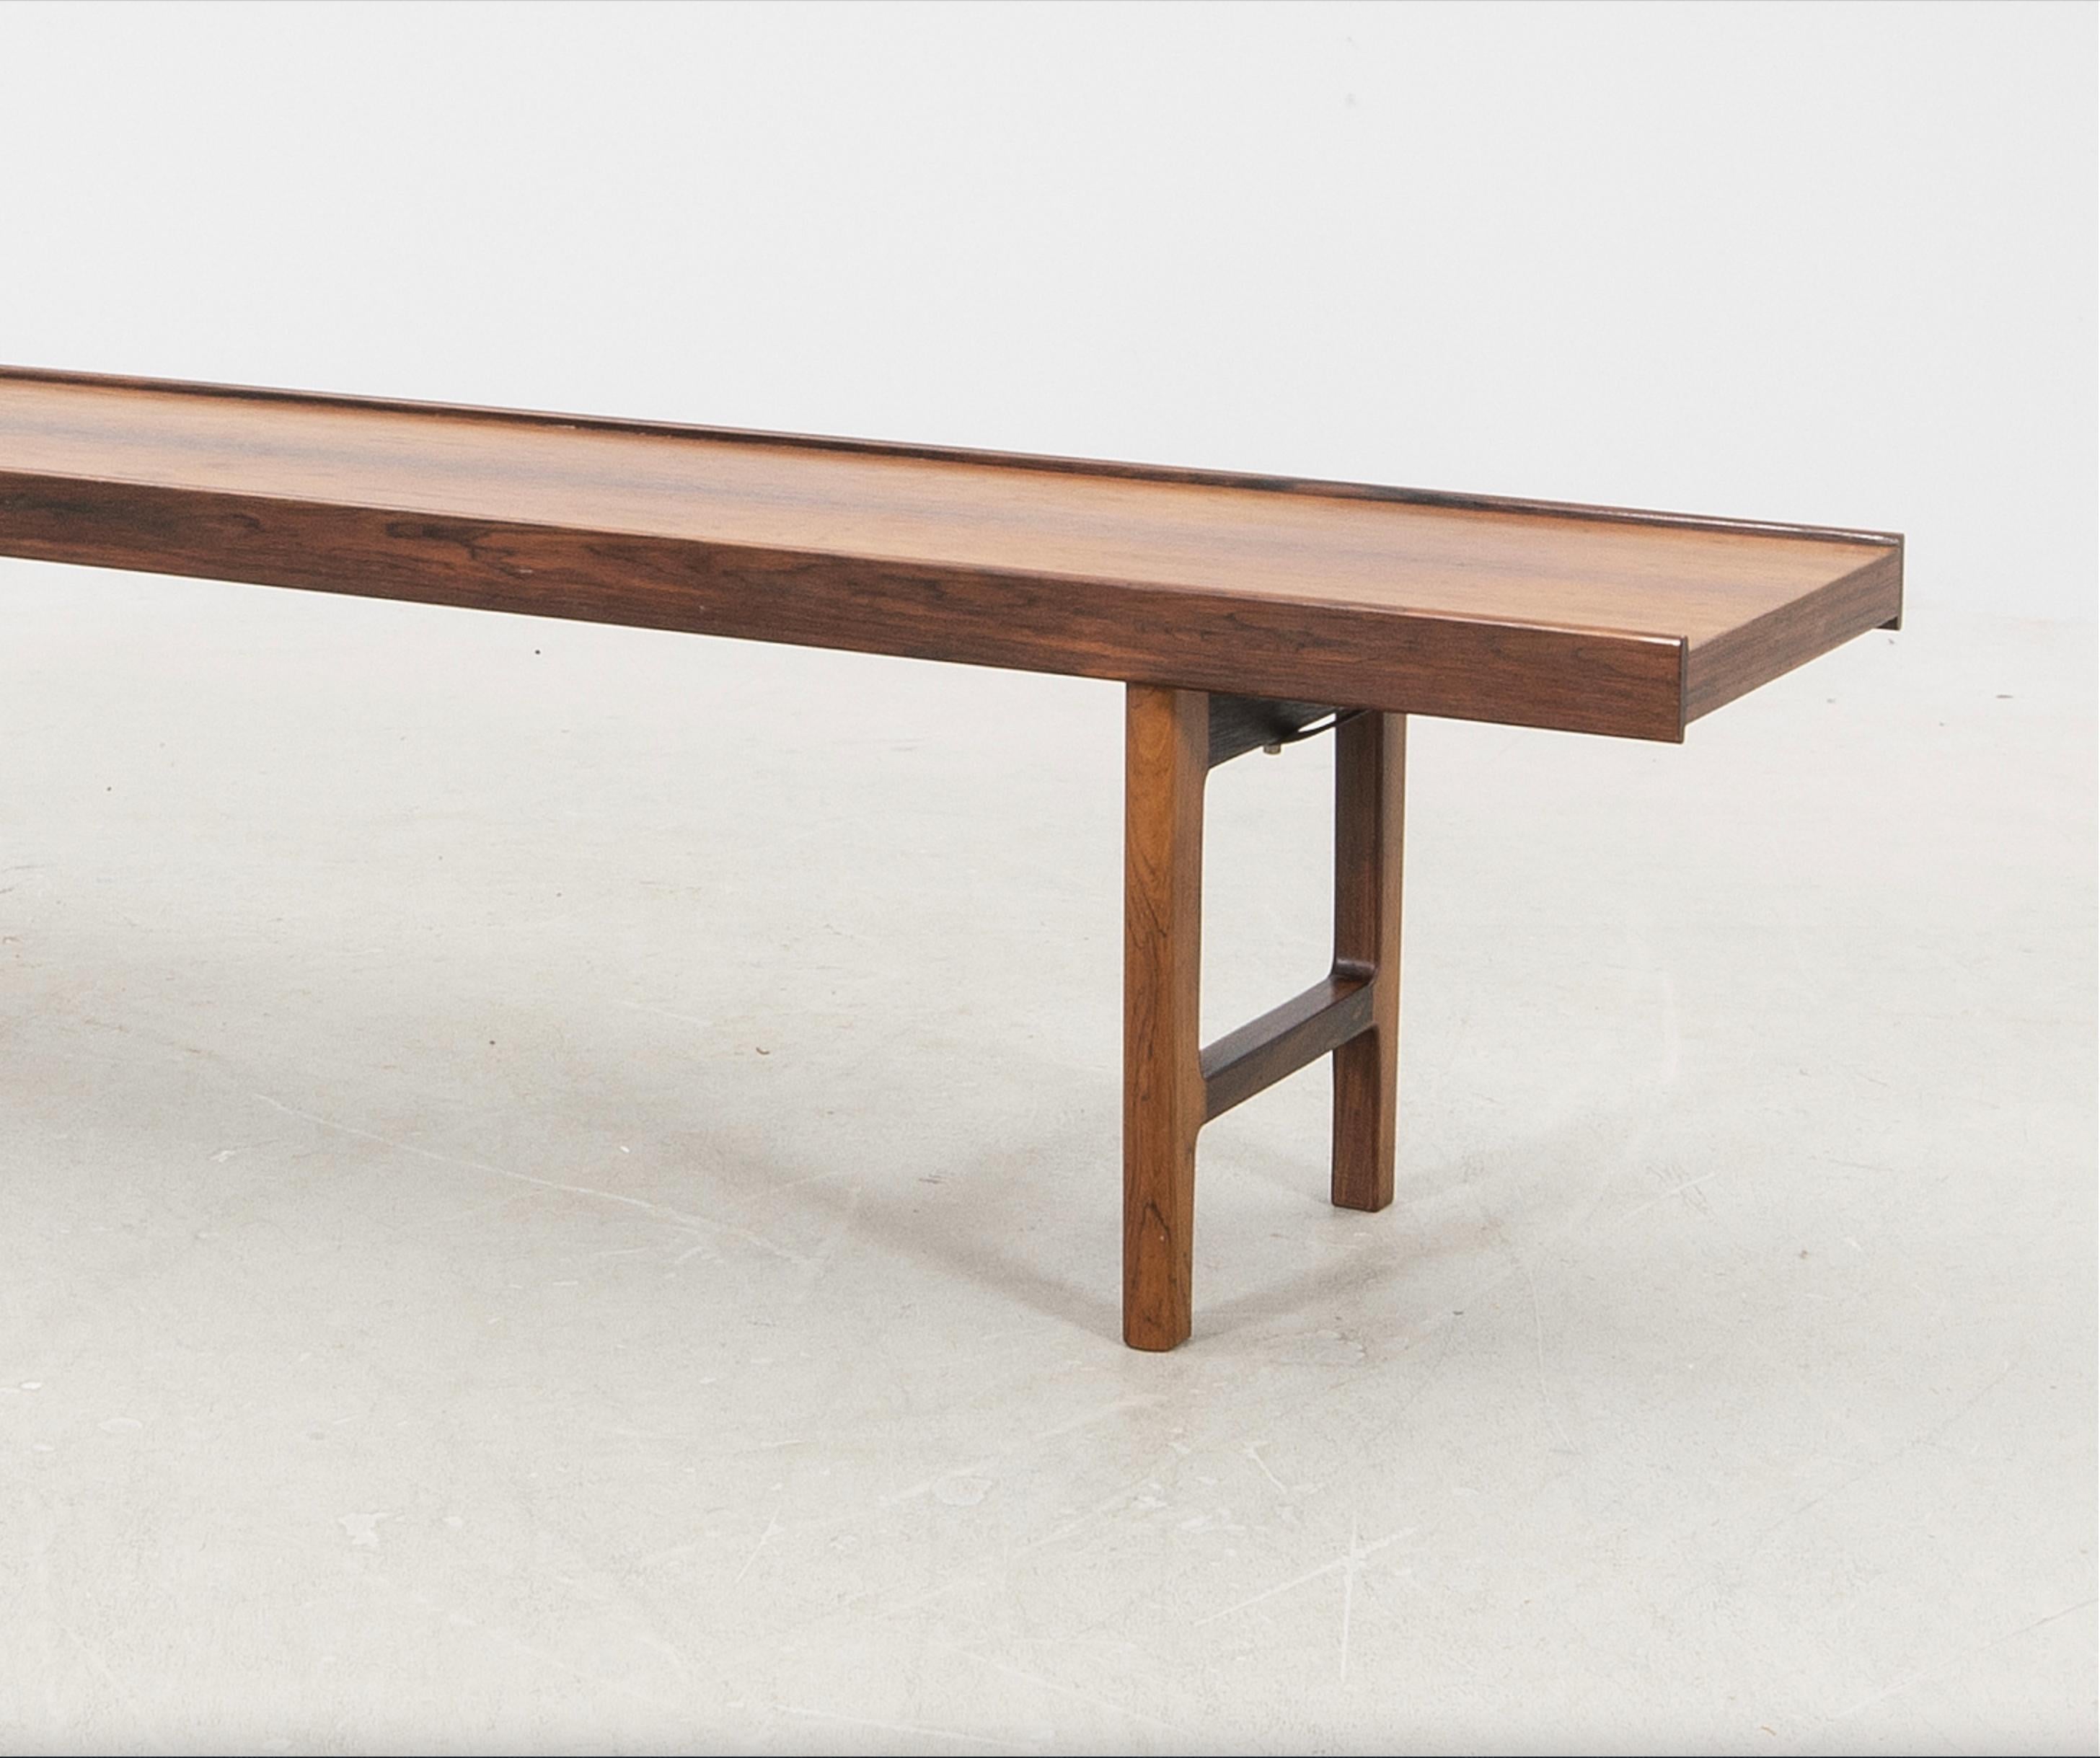 Bench by Torbjørn Afdal Rosewood model “Krobo” for Bruksbo, Norway, 1960s
Introducing a stunning vintage bench by Torjborn Afdal, crafted from luxurious rosewood and featuring his iconic 